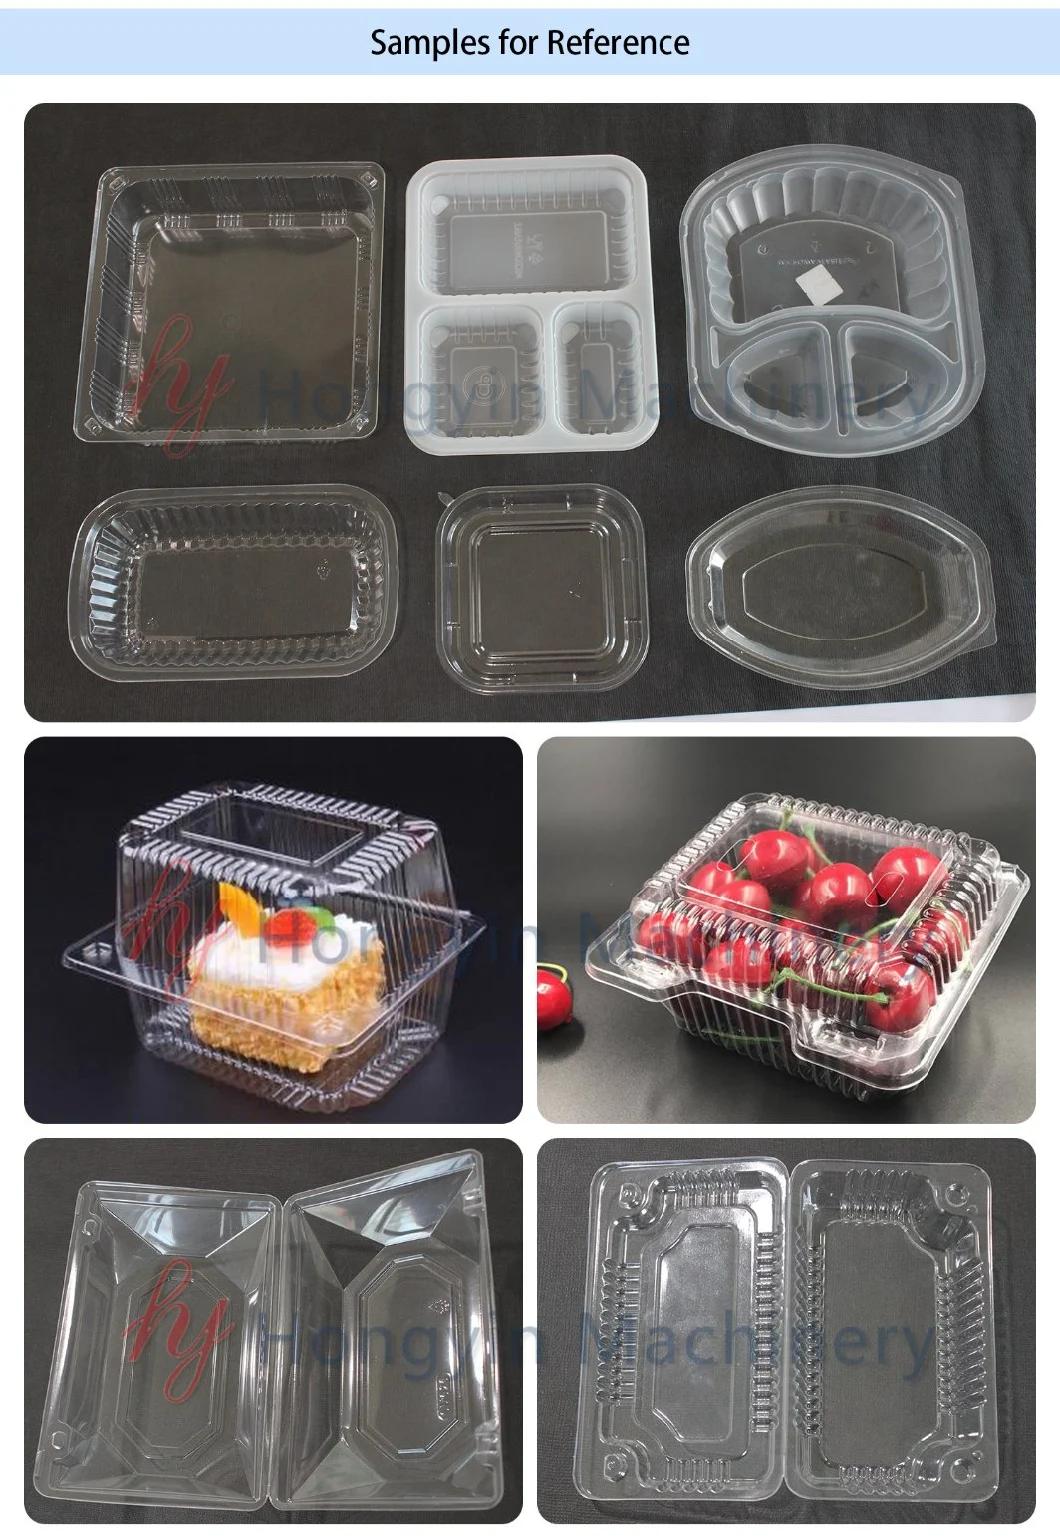 Multifunctional Automatic Egg Tray Plastic Thermoforming Machine with Stacker